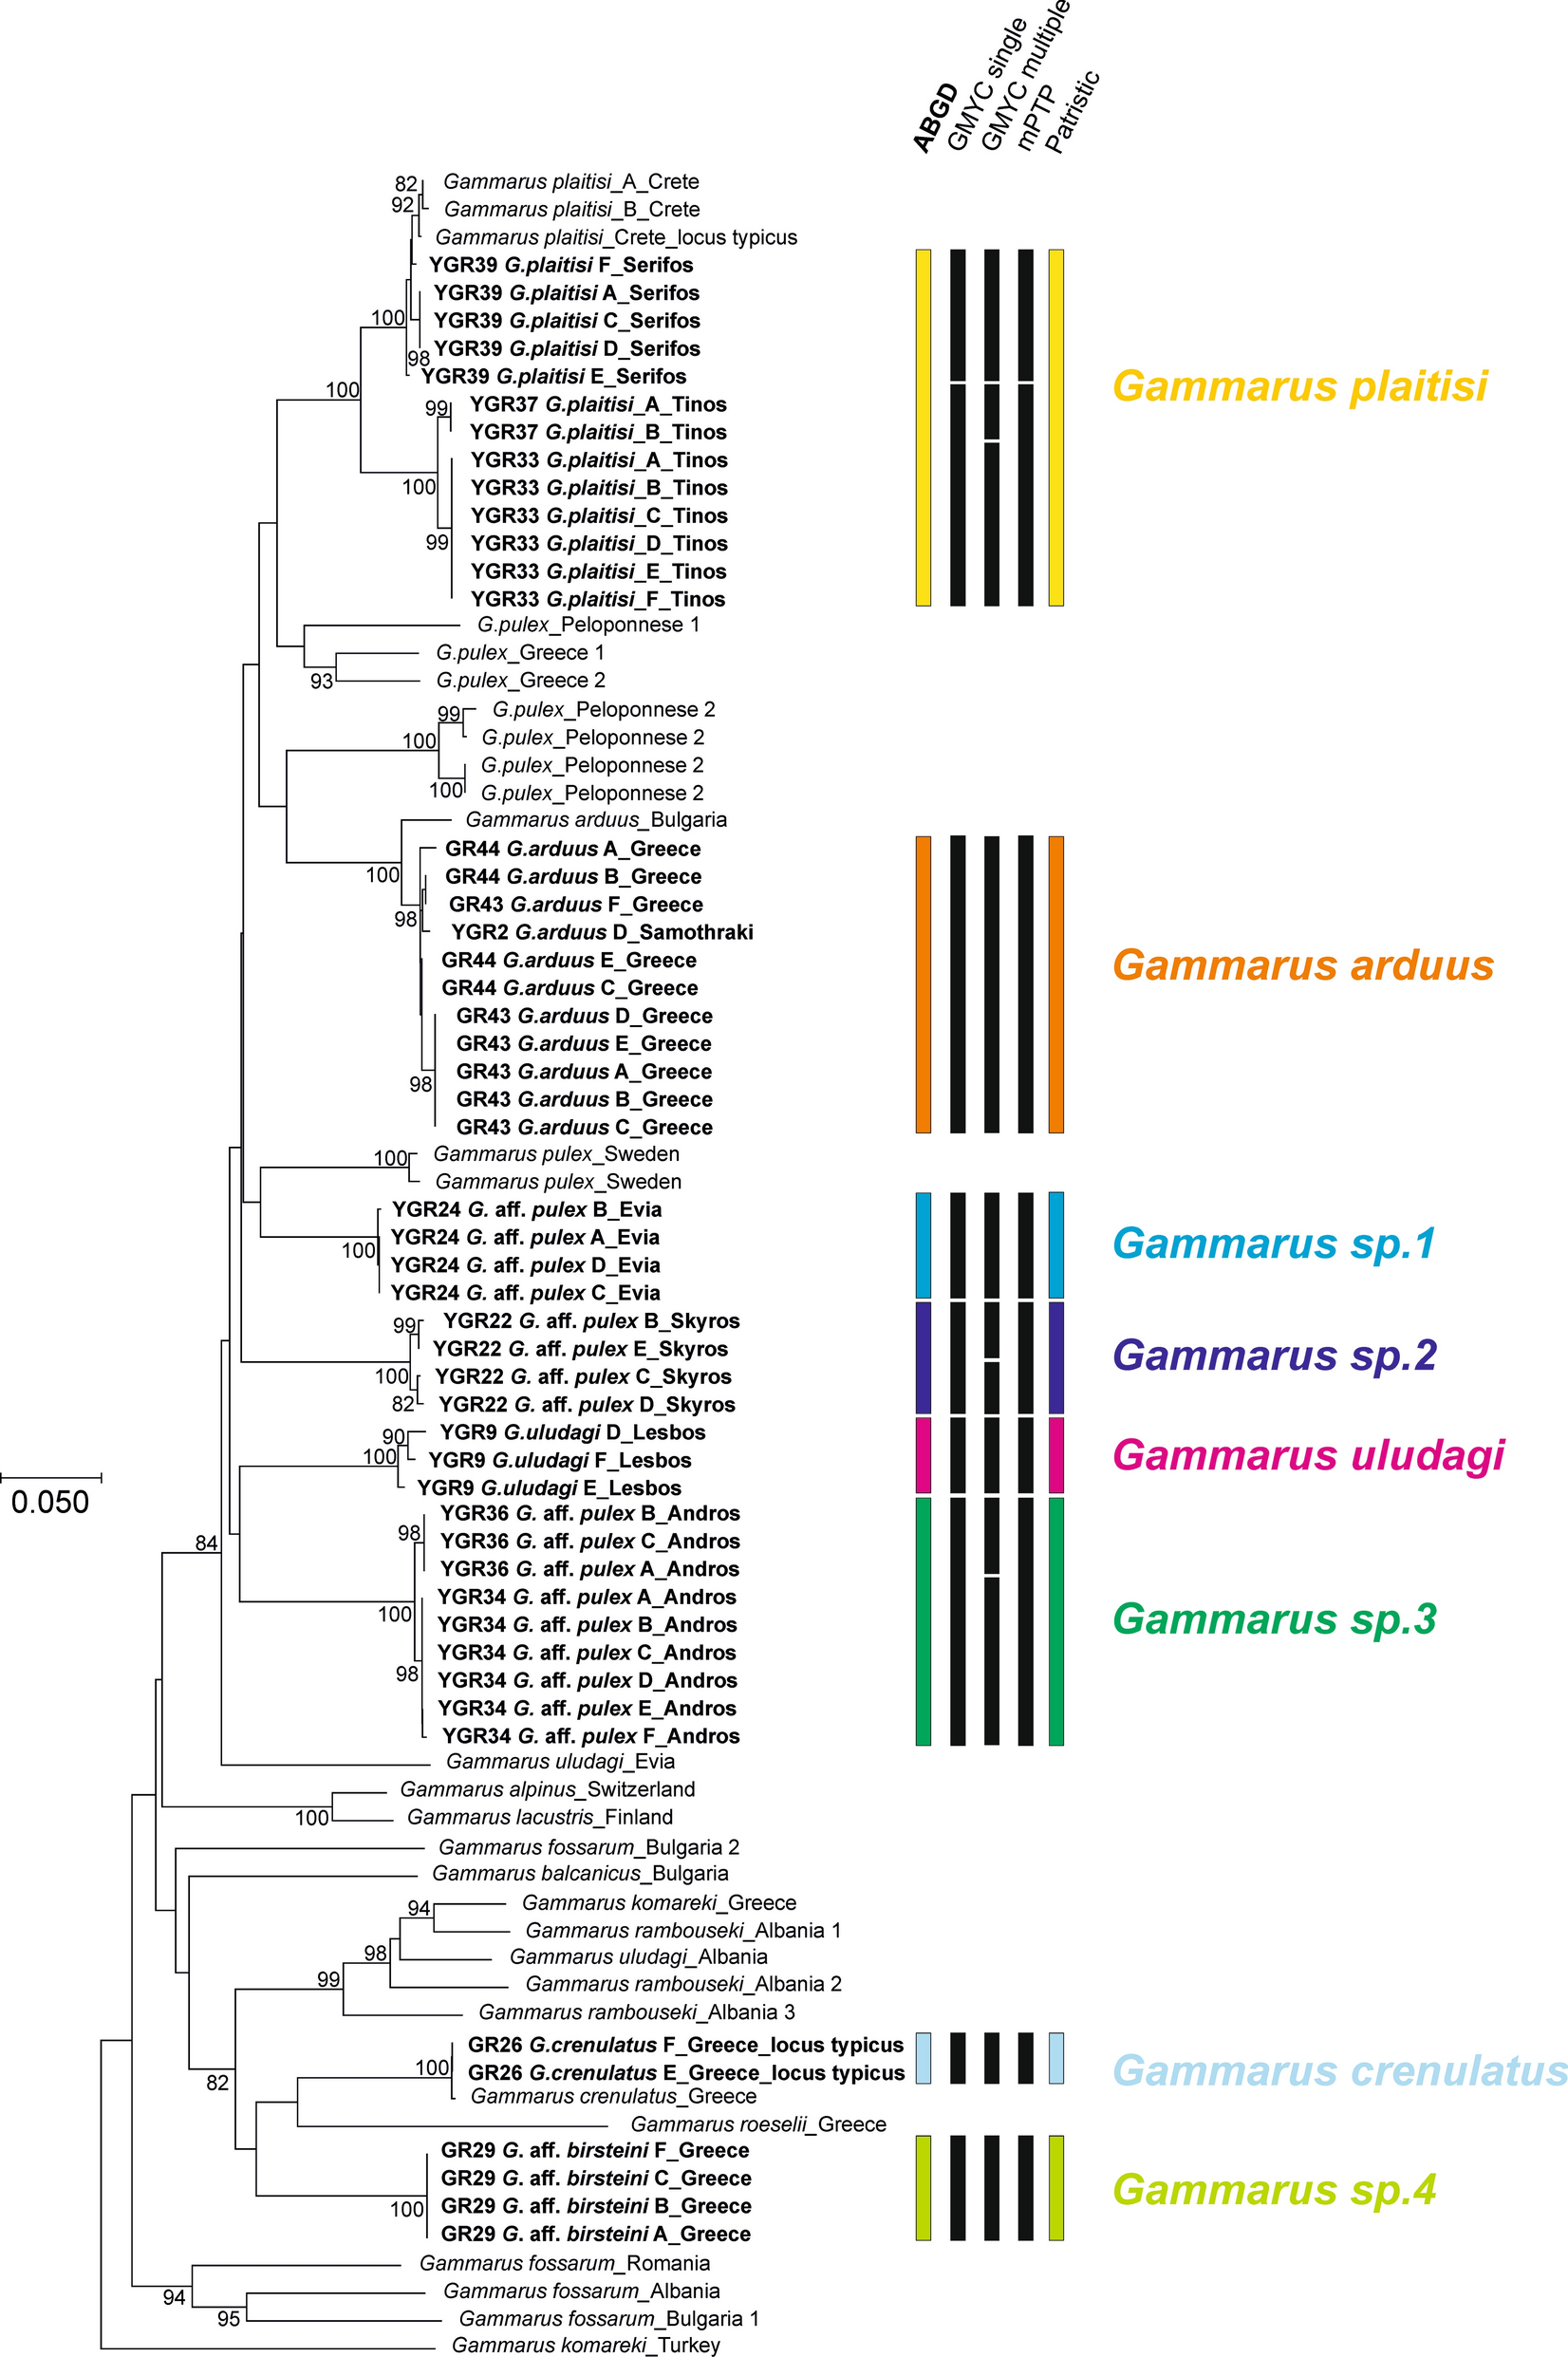 Molecular data suggest multiple origins and diversification times of  freshwater gammarids on the Aegean archipelago | Scientific Reports